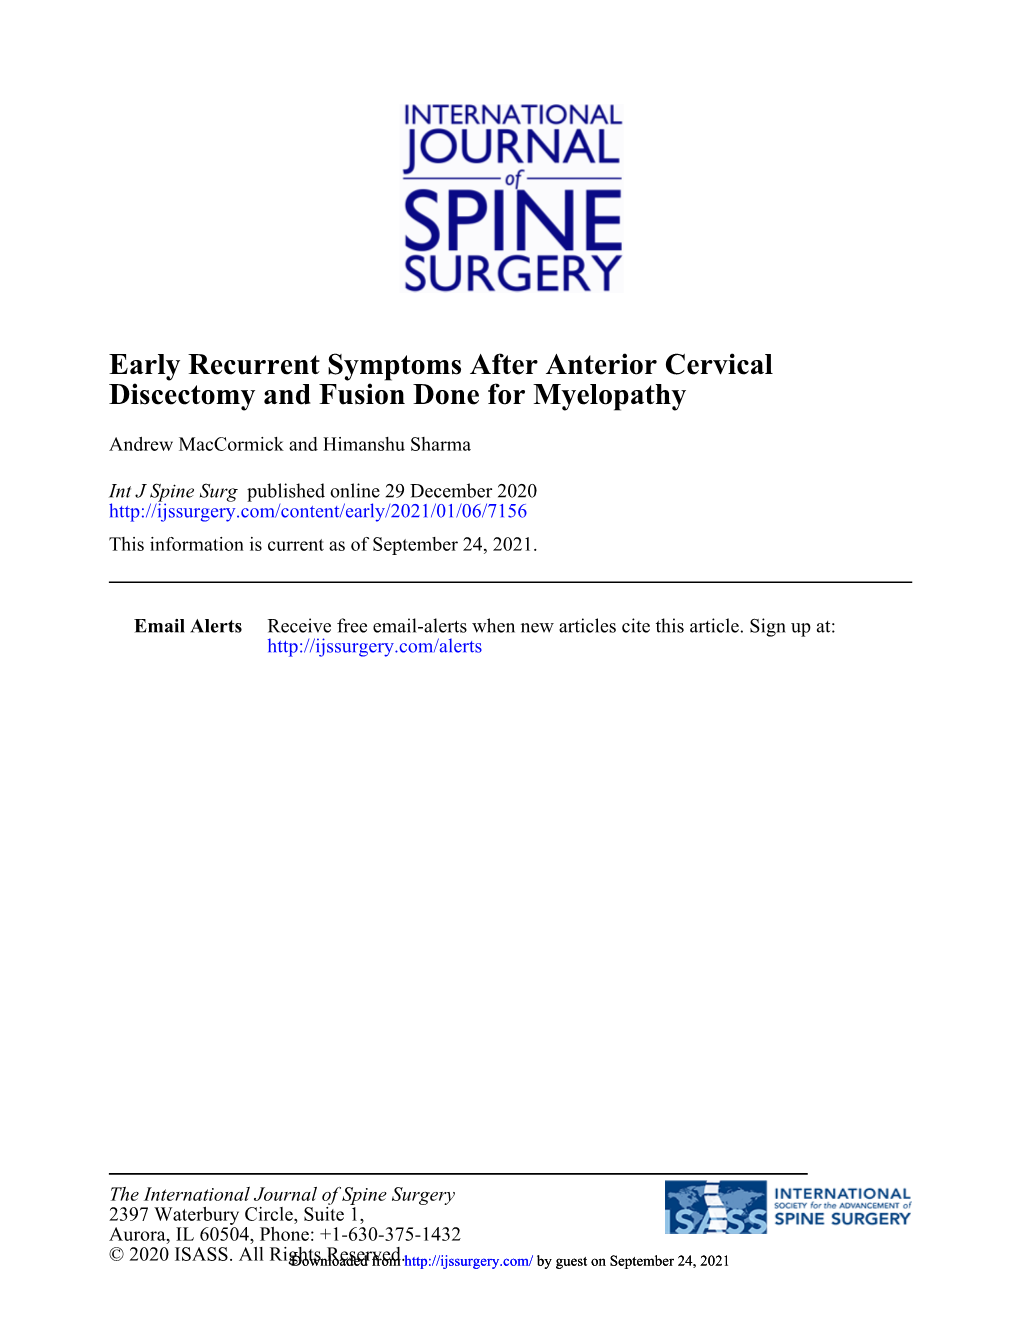 Discectomy and Fusion Done for Myelopathy Early Recurrent